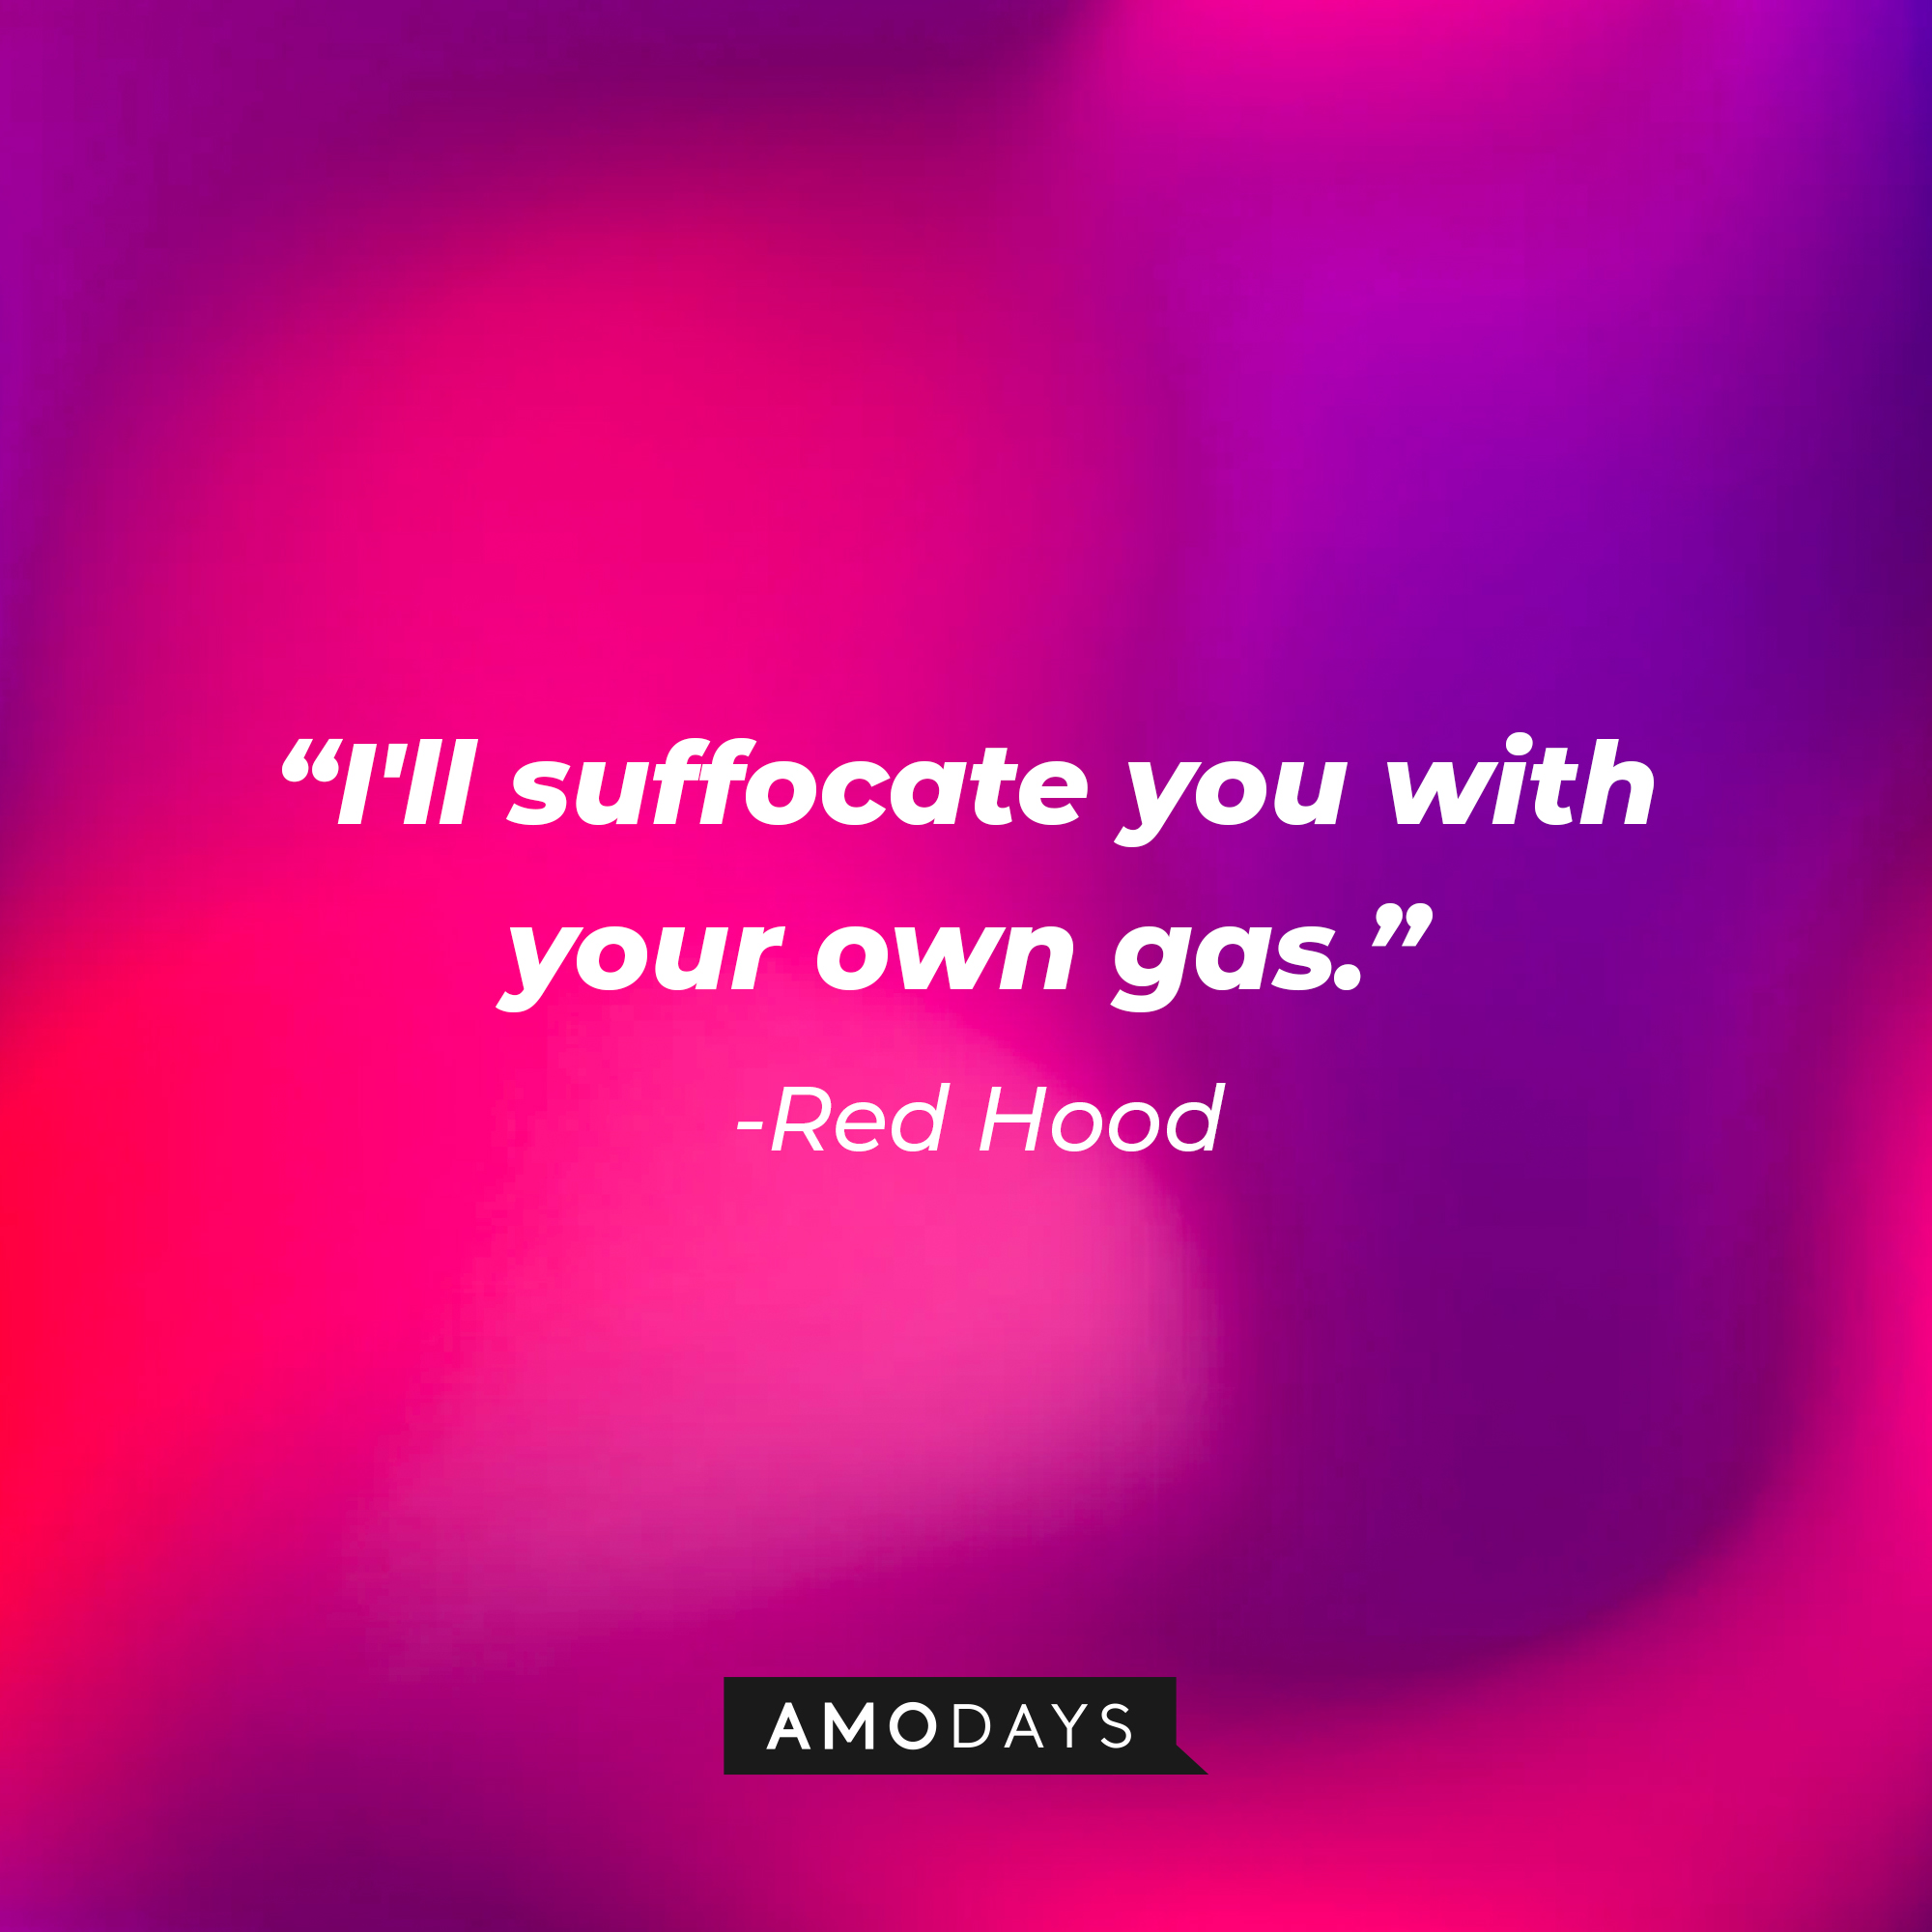 Red Hood’s quote: "I'll suffocate you with your own gas." | Source: AmoDays